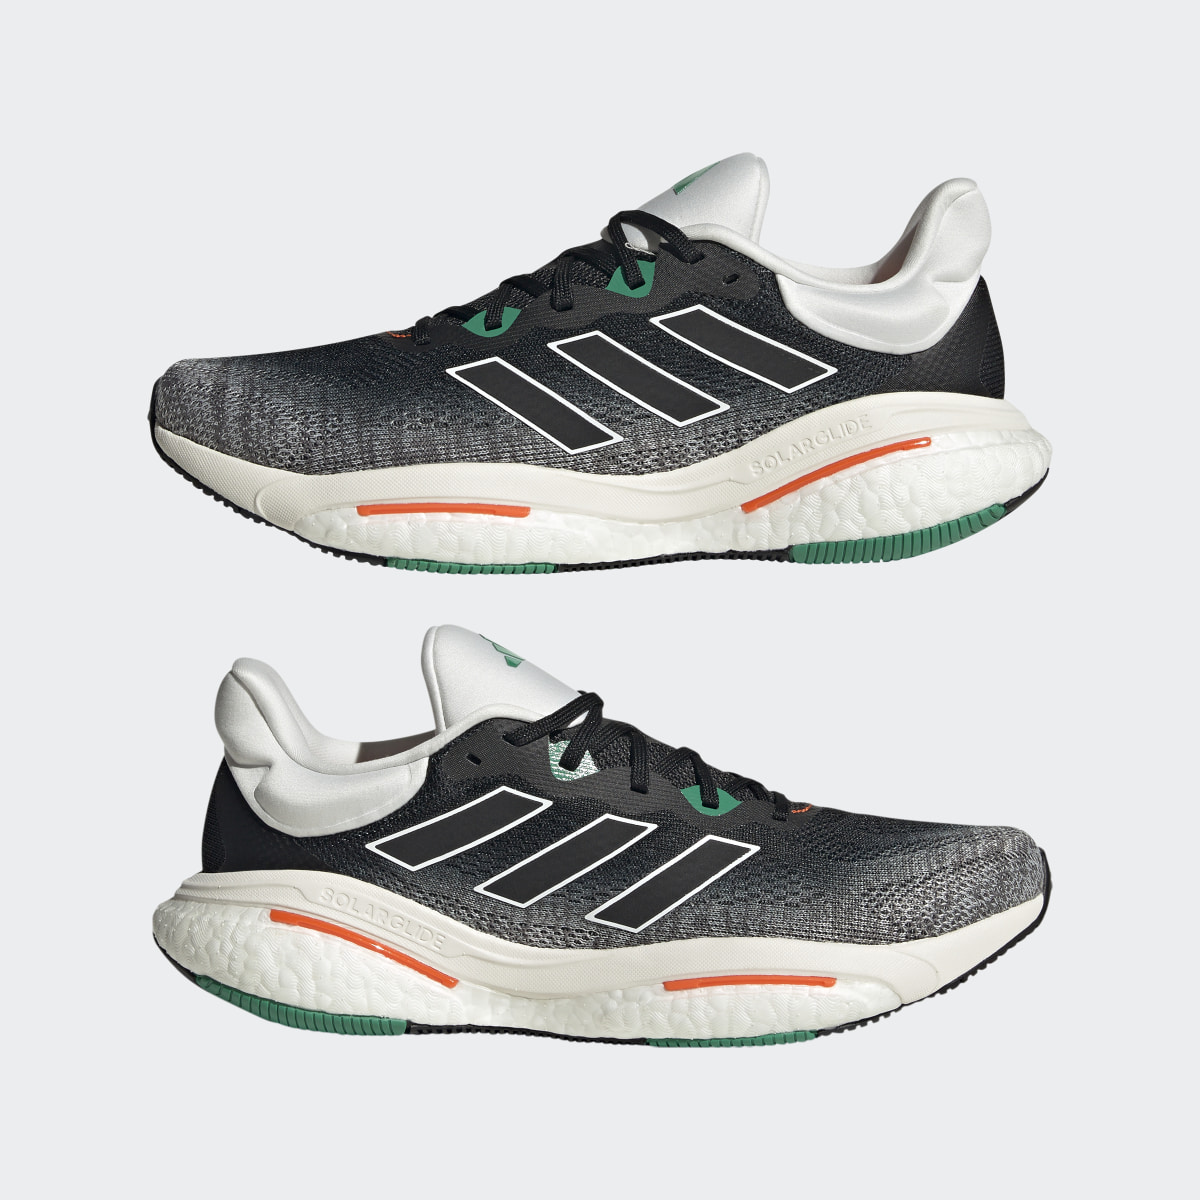 Adidas SOLARGLIDE 6 Shoes. 11